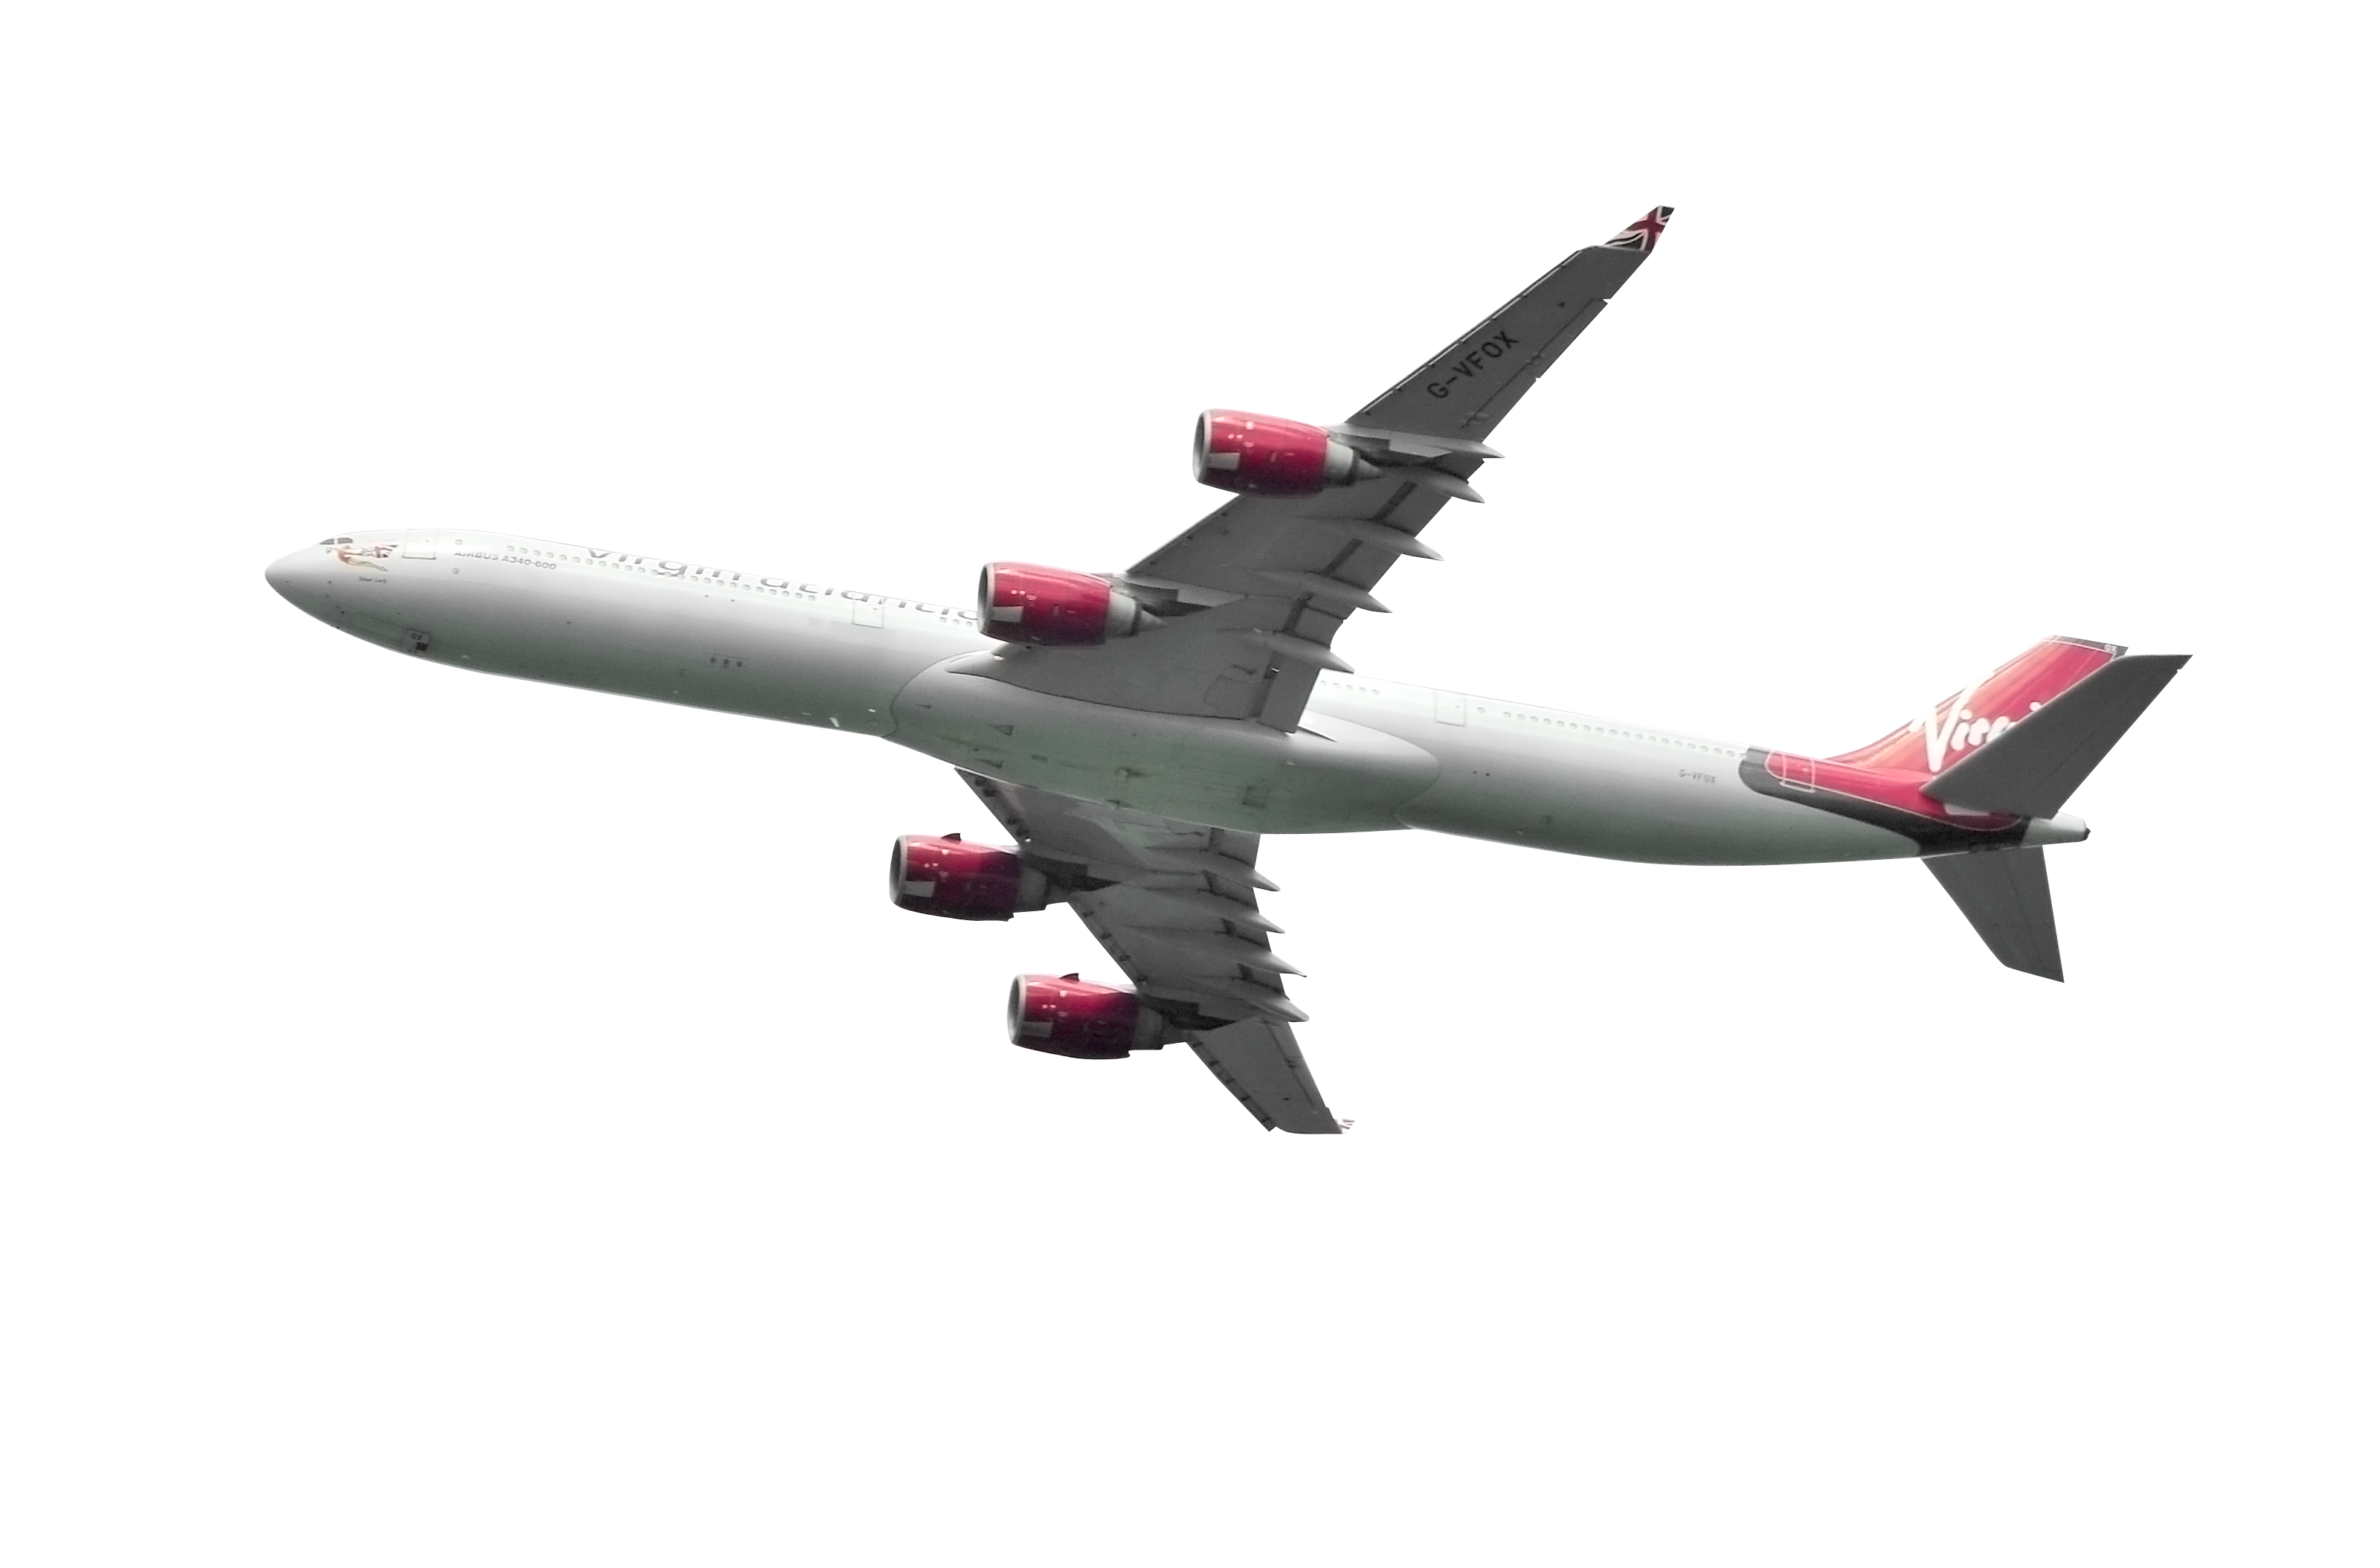 Free PNG HD Planes Transparent HD Planes.PNG Images. | PlusPNG